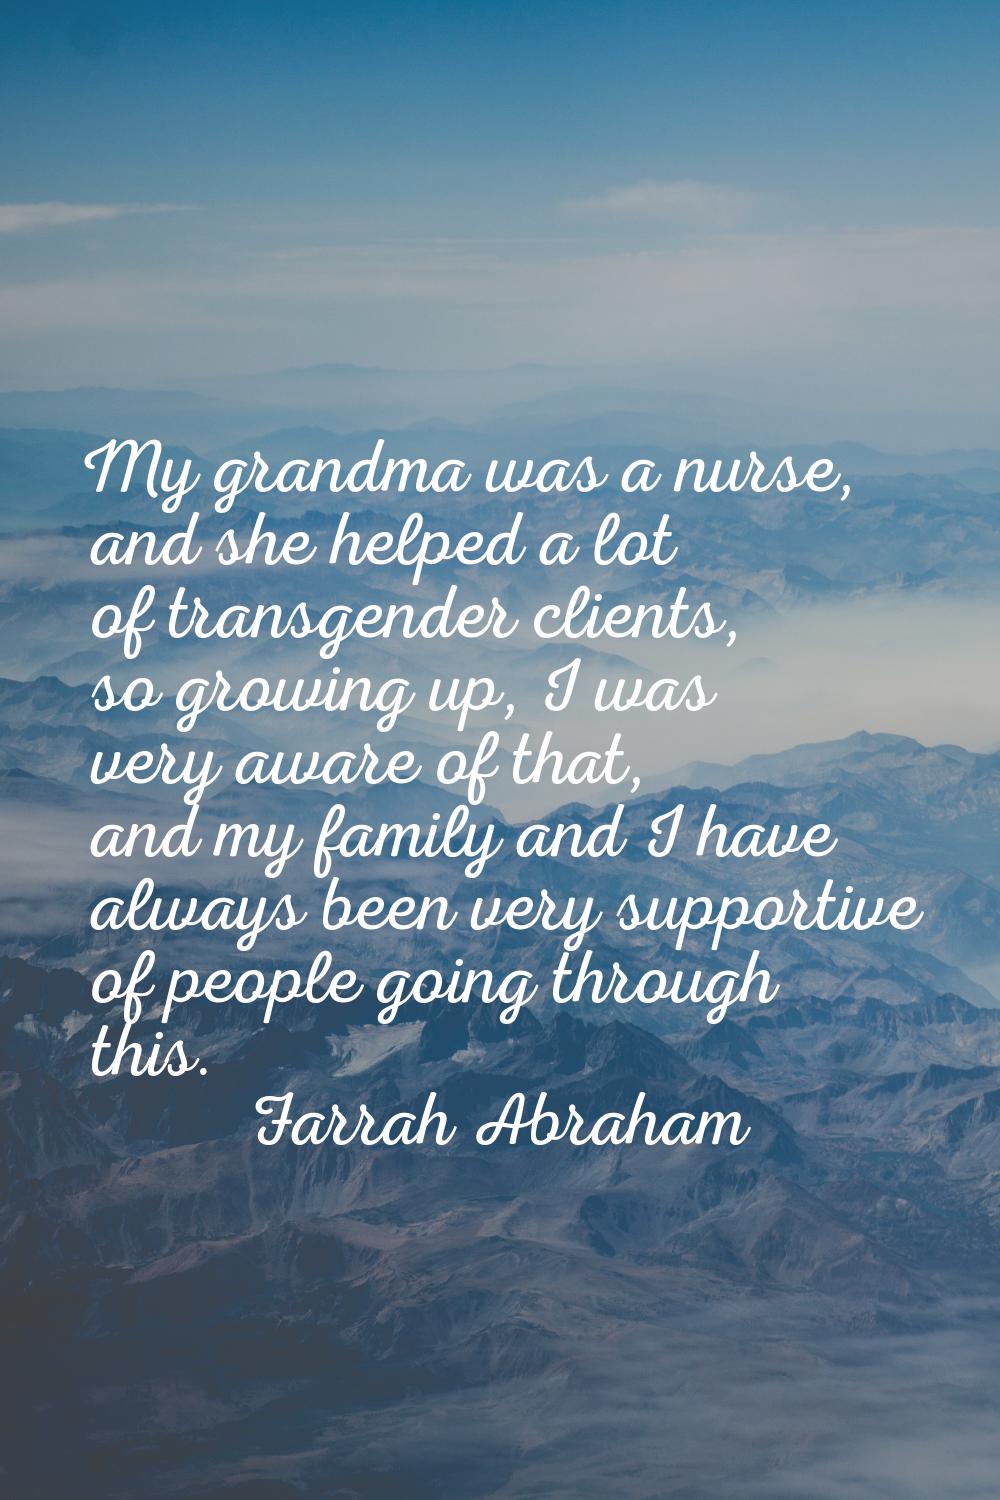 My grandma was a nurse, and she helped a lot of transgender clients, so growing up, I was very awar